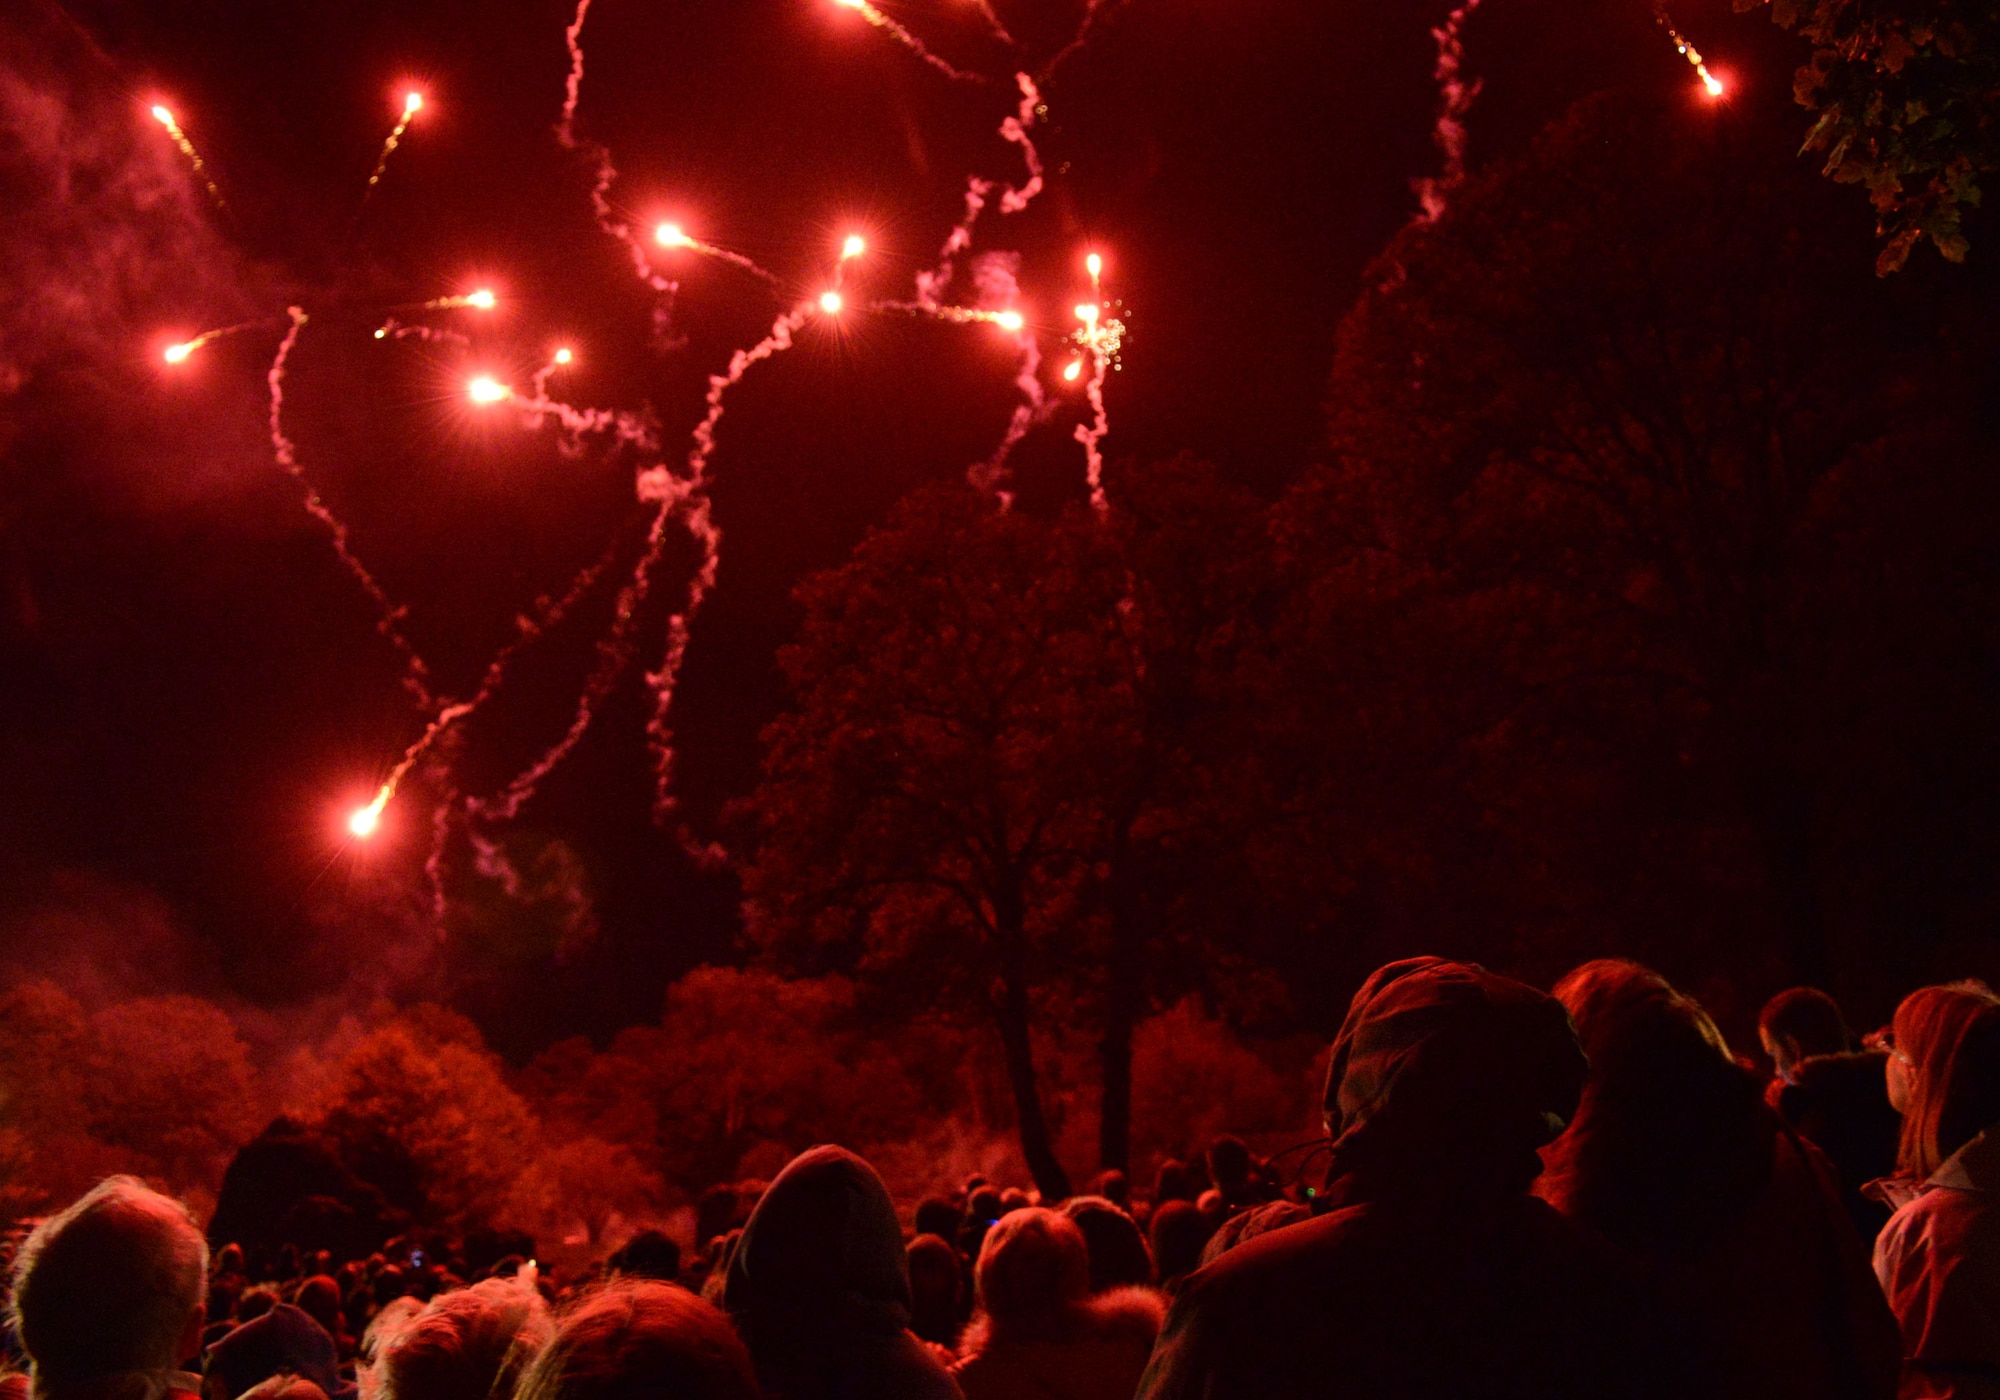 Members of the local community watch as fireworks are shot off during a Bonfire Night celebration Nov. 2, 2013, over the Abbey Gardens in Bury St. Edmunds, England. Traditionally, a fireworks display commemorates Bonfire Night, the night Guy Fawkes and the gunpowder plot were foiled. Team Mildenhall members assisted during the celebration by providing security and safety teams. (U.S. Air Force photo by Airman 1st Class Dillon Johnston/Released)